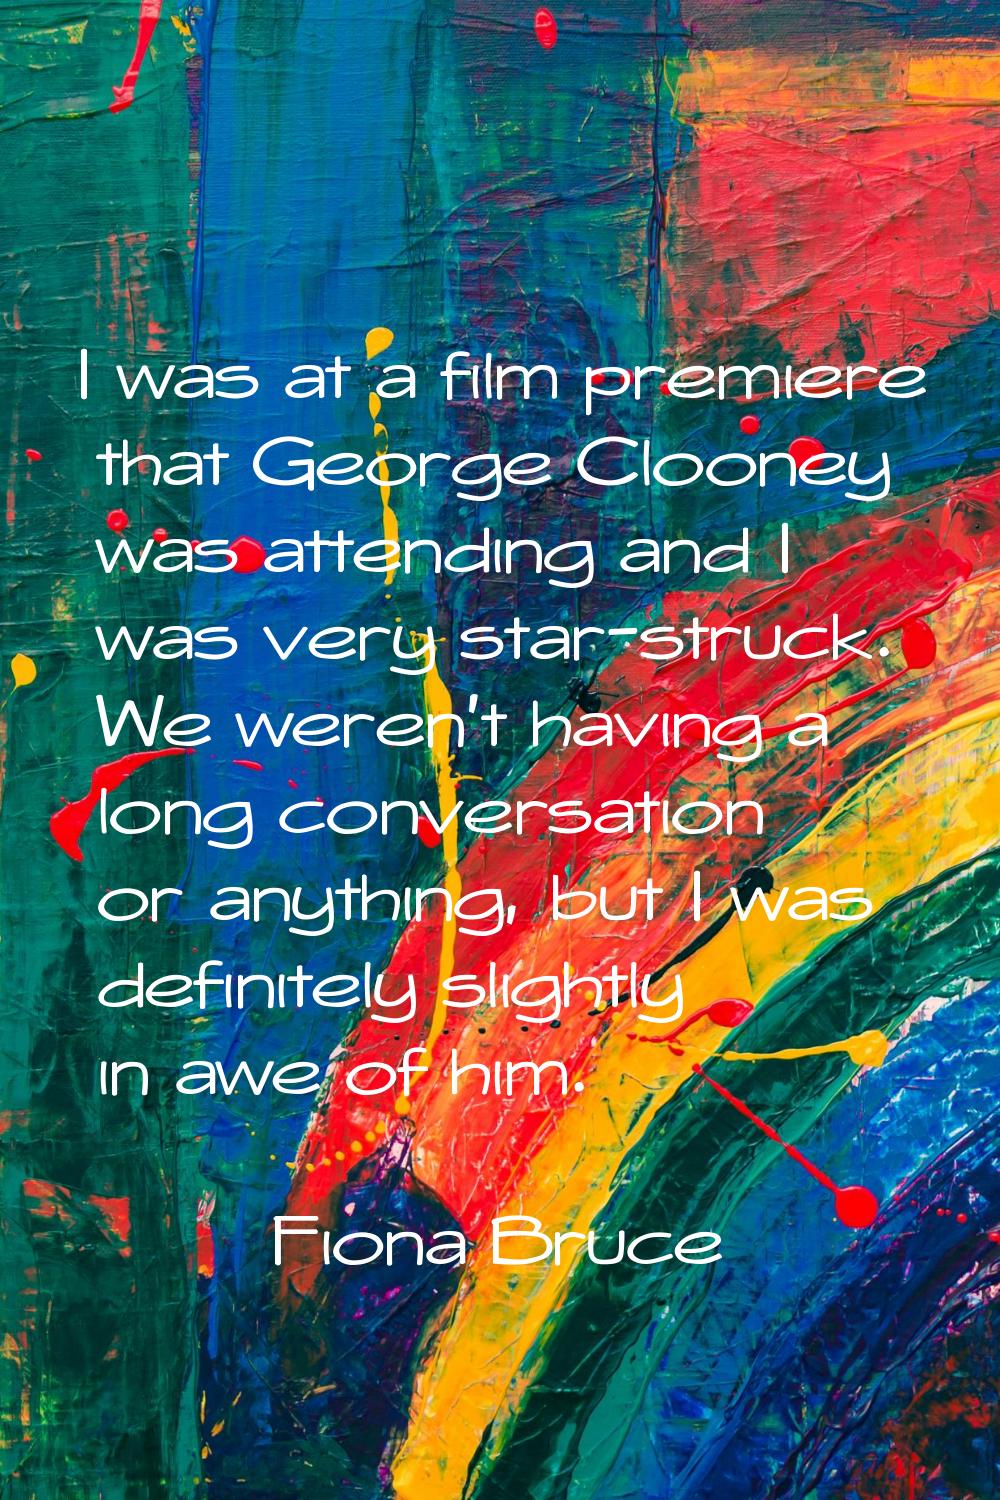 I was at a film premiere that George Clooney was attending and I was very star-struck. We weren't h